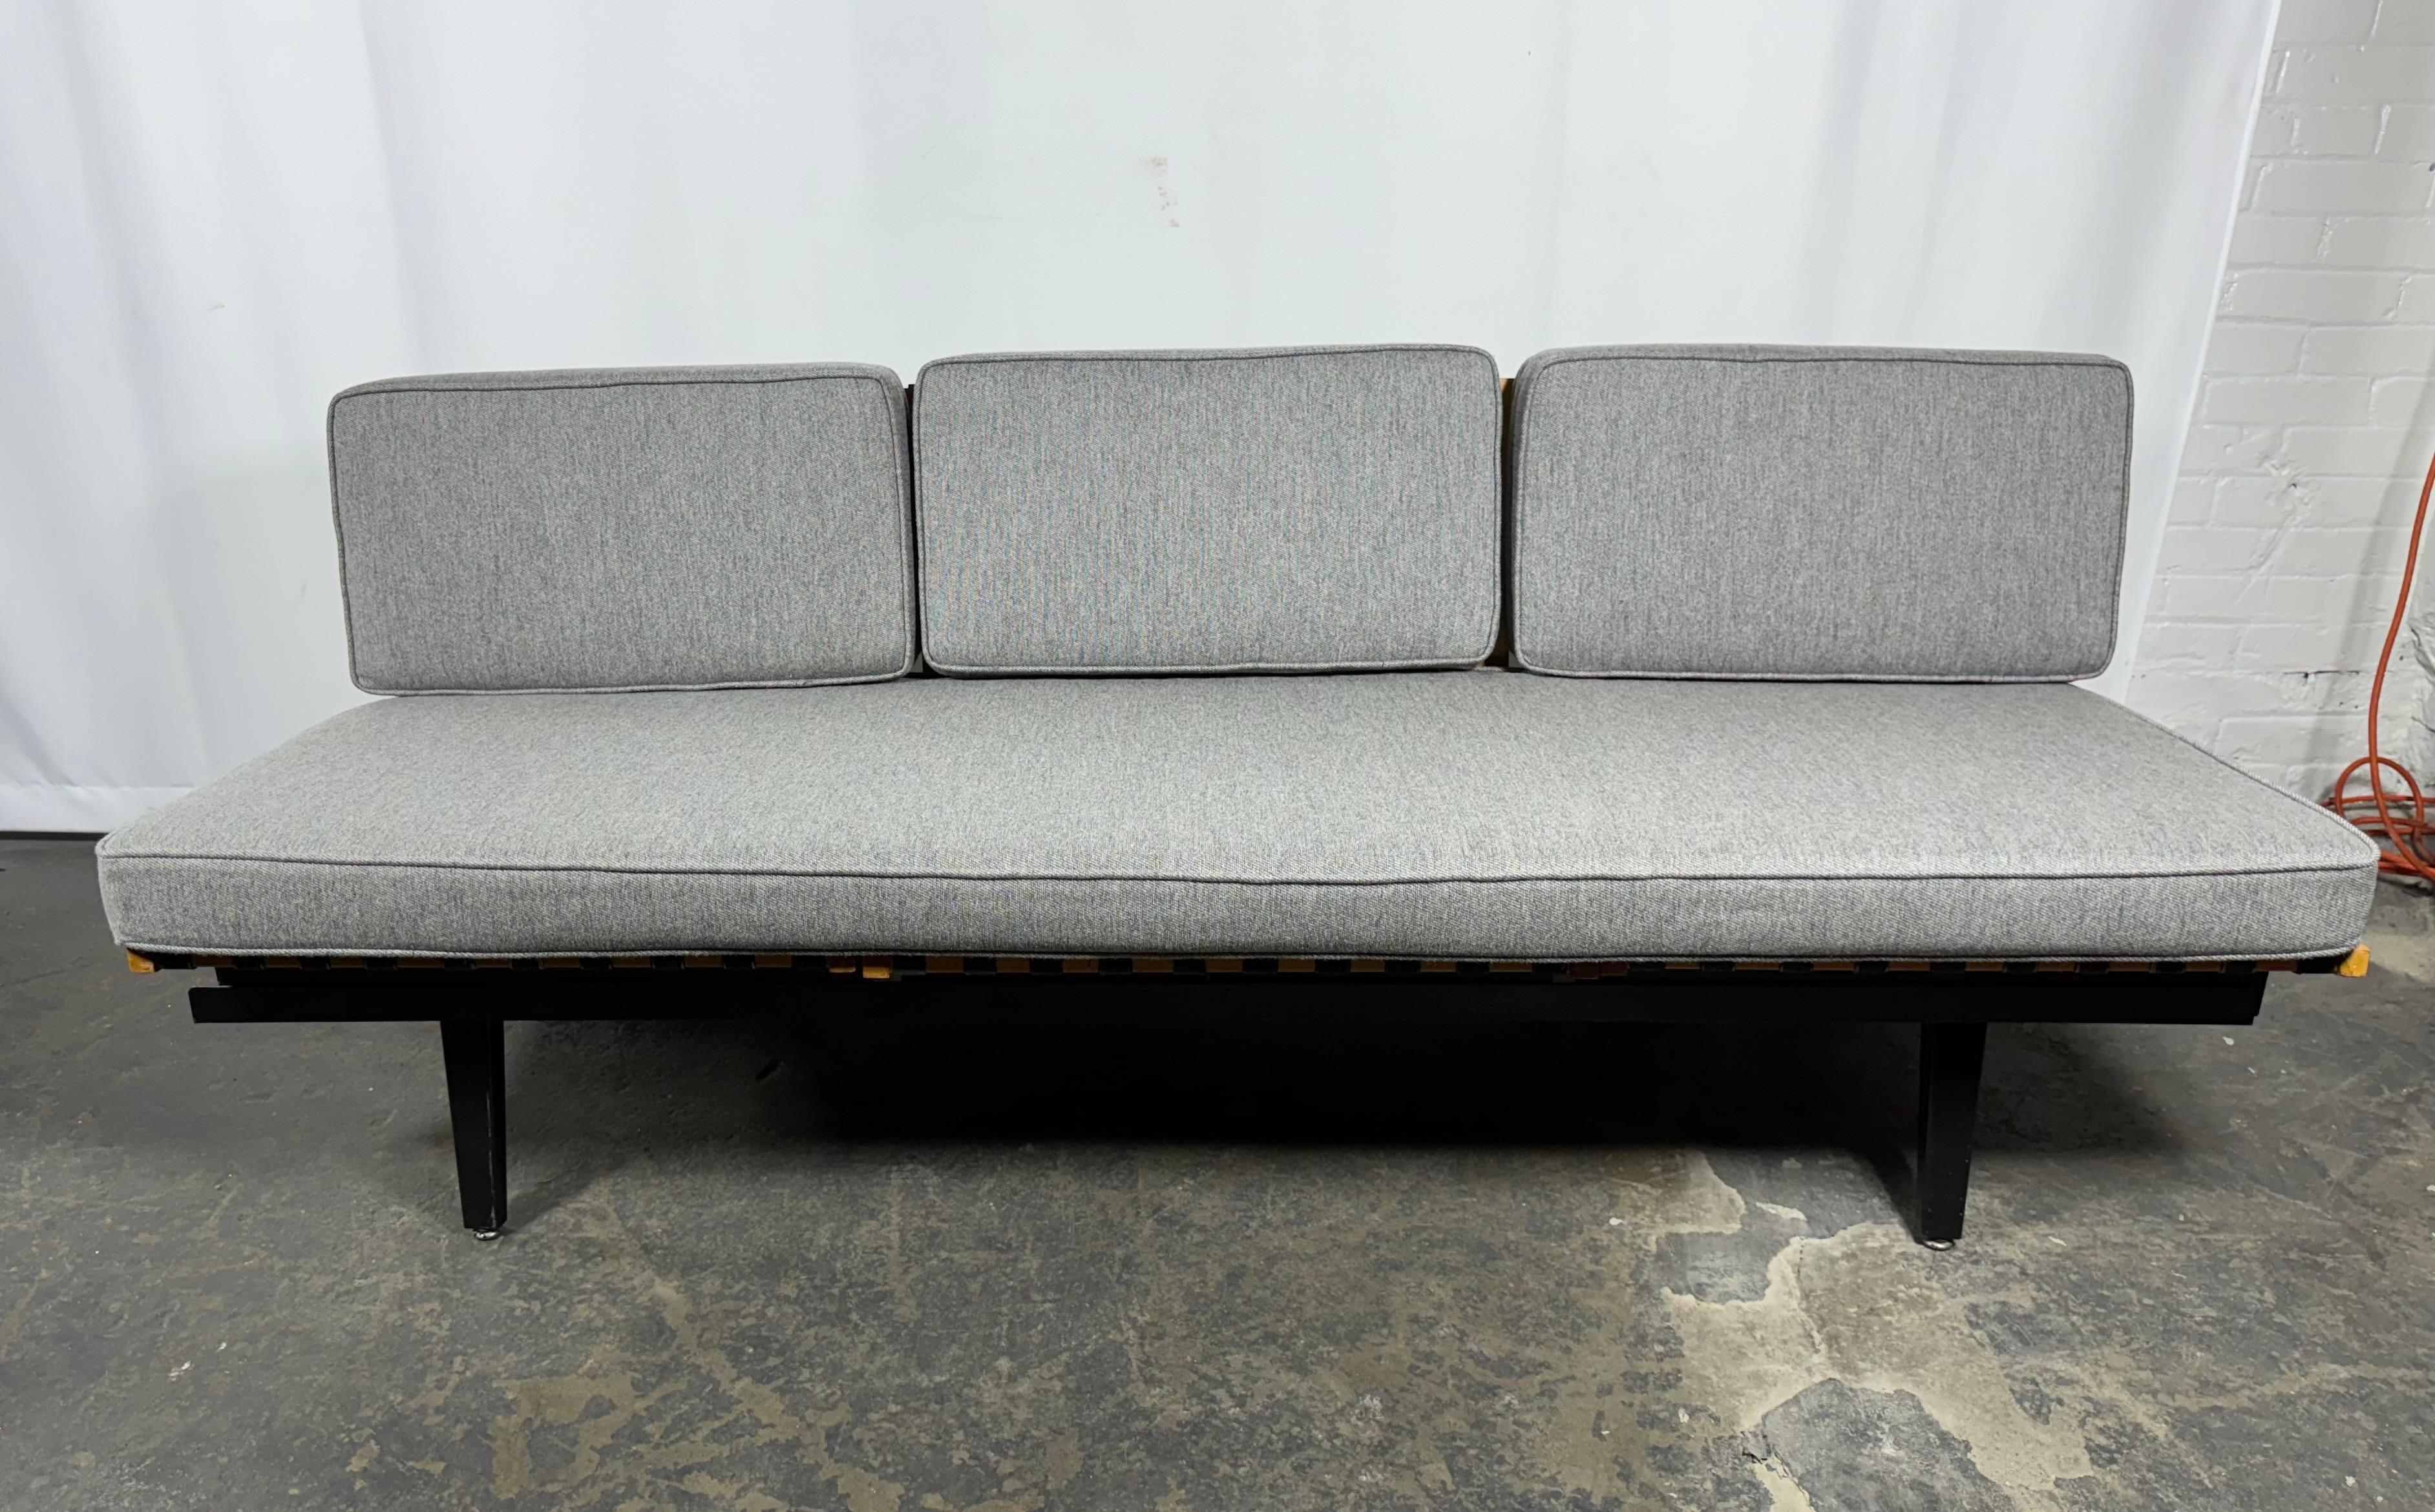 Early Production George Nelson / Herman Miller Modular Steel Frame Sofa In Good Condition For Sale In Buffalo, NY